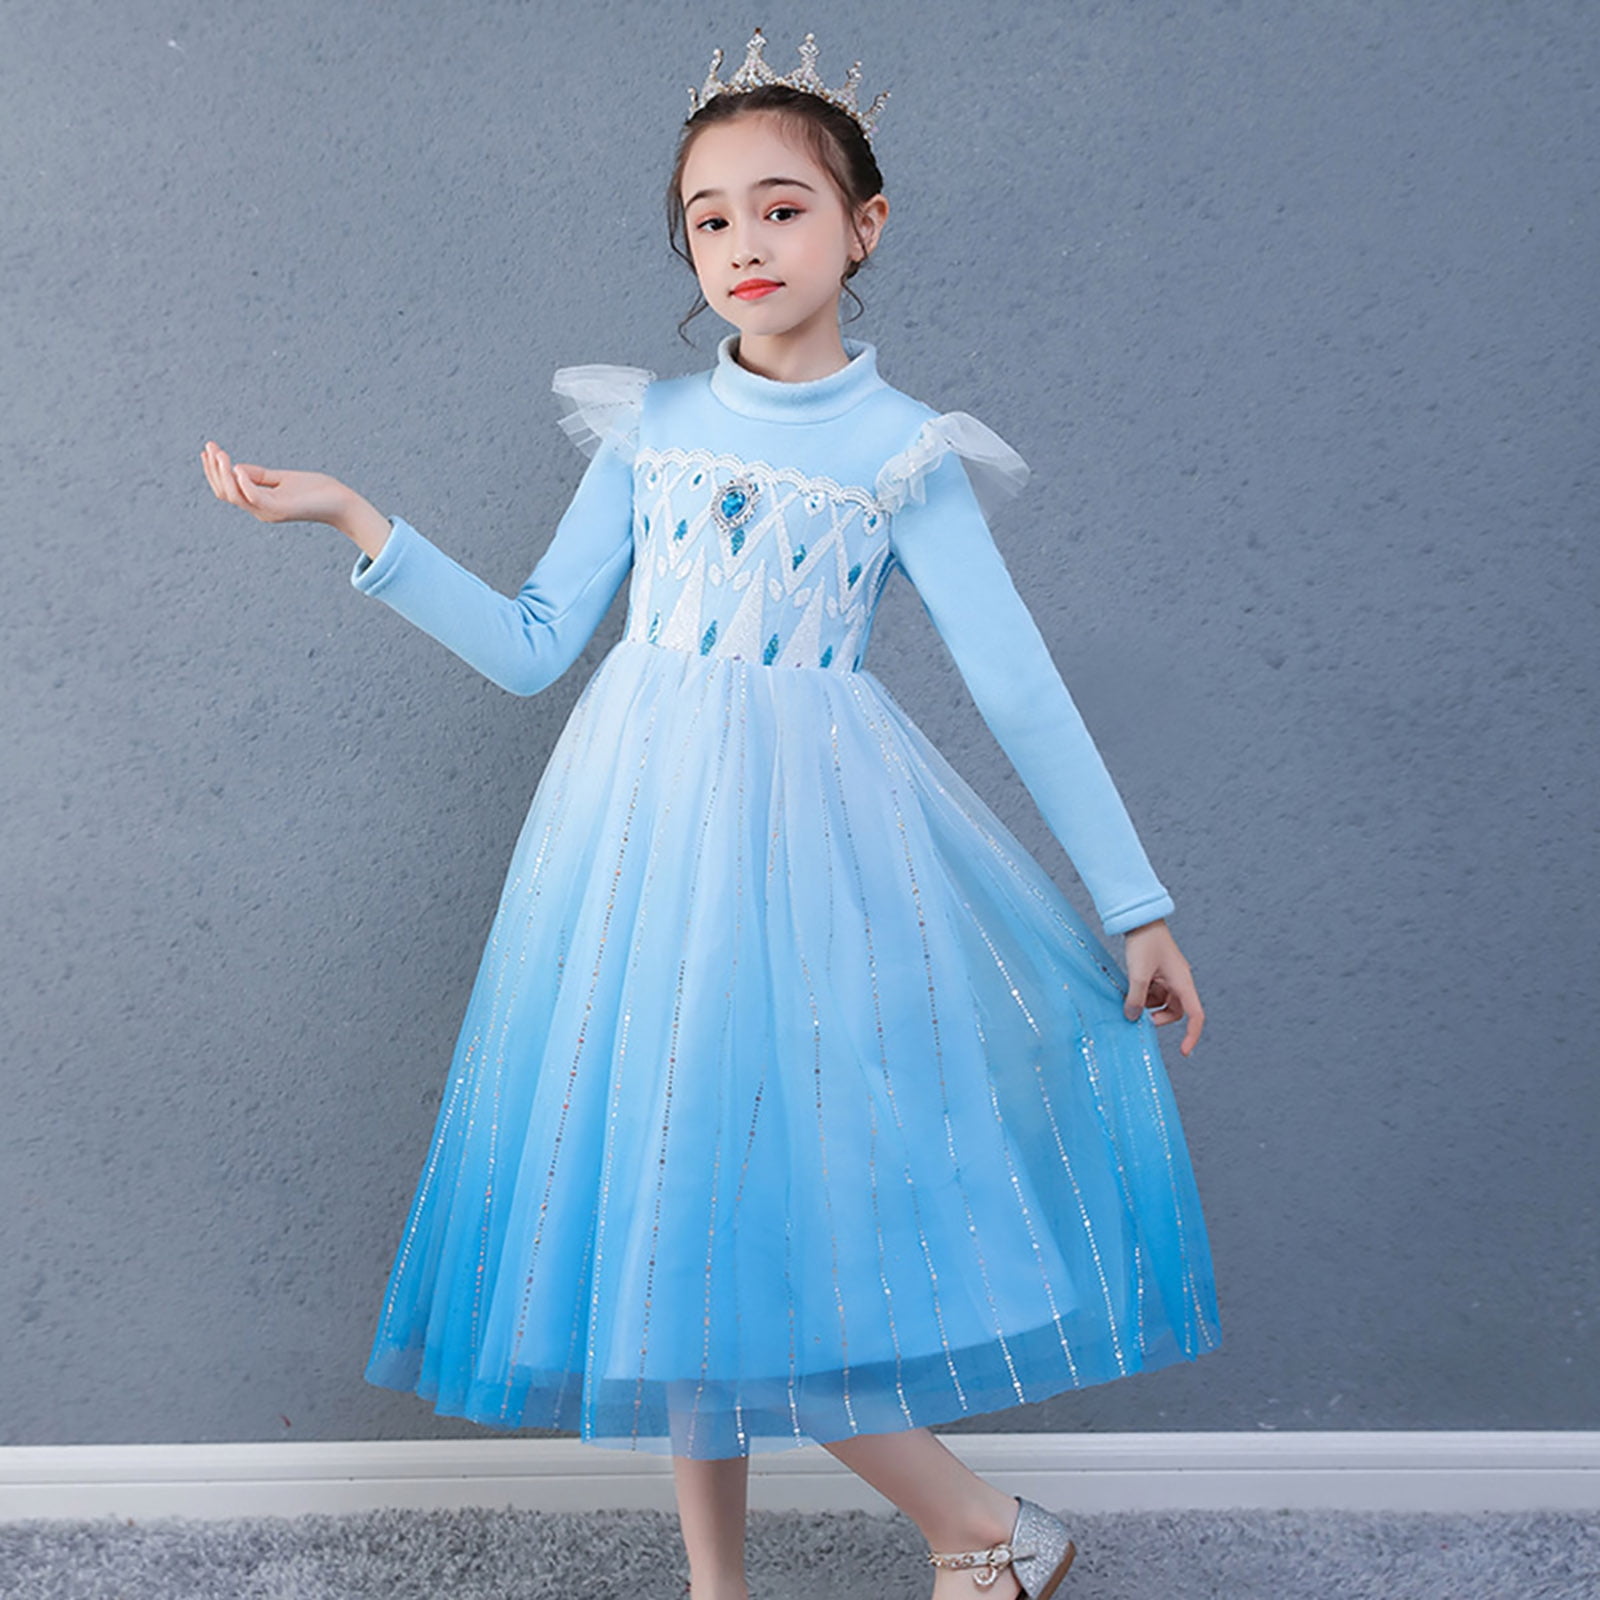 Frozen 2 Elsa Dress Up Girls Fancy Cosplay Kids Costume Party Outfit NEW |  eBay